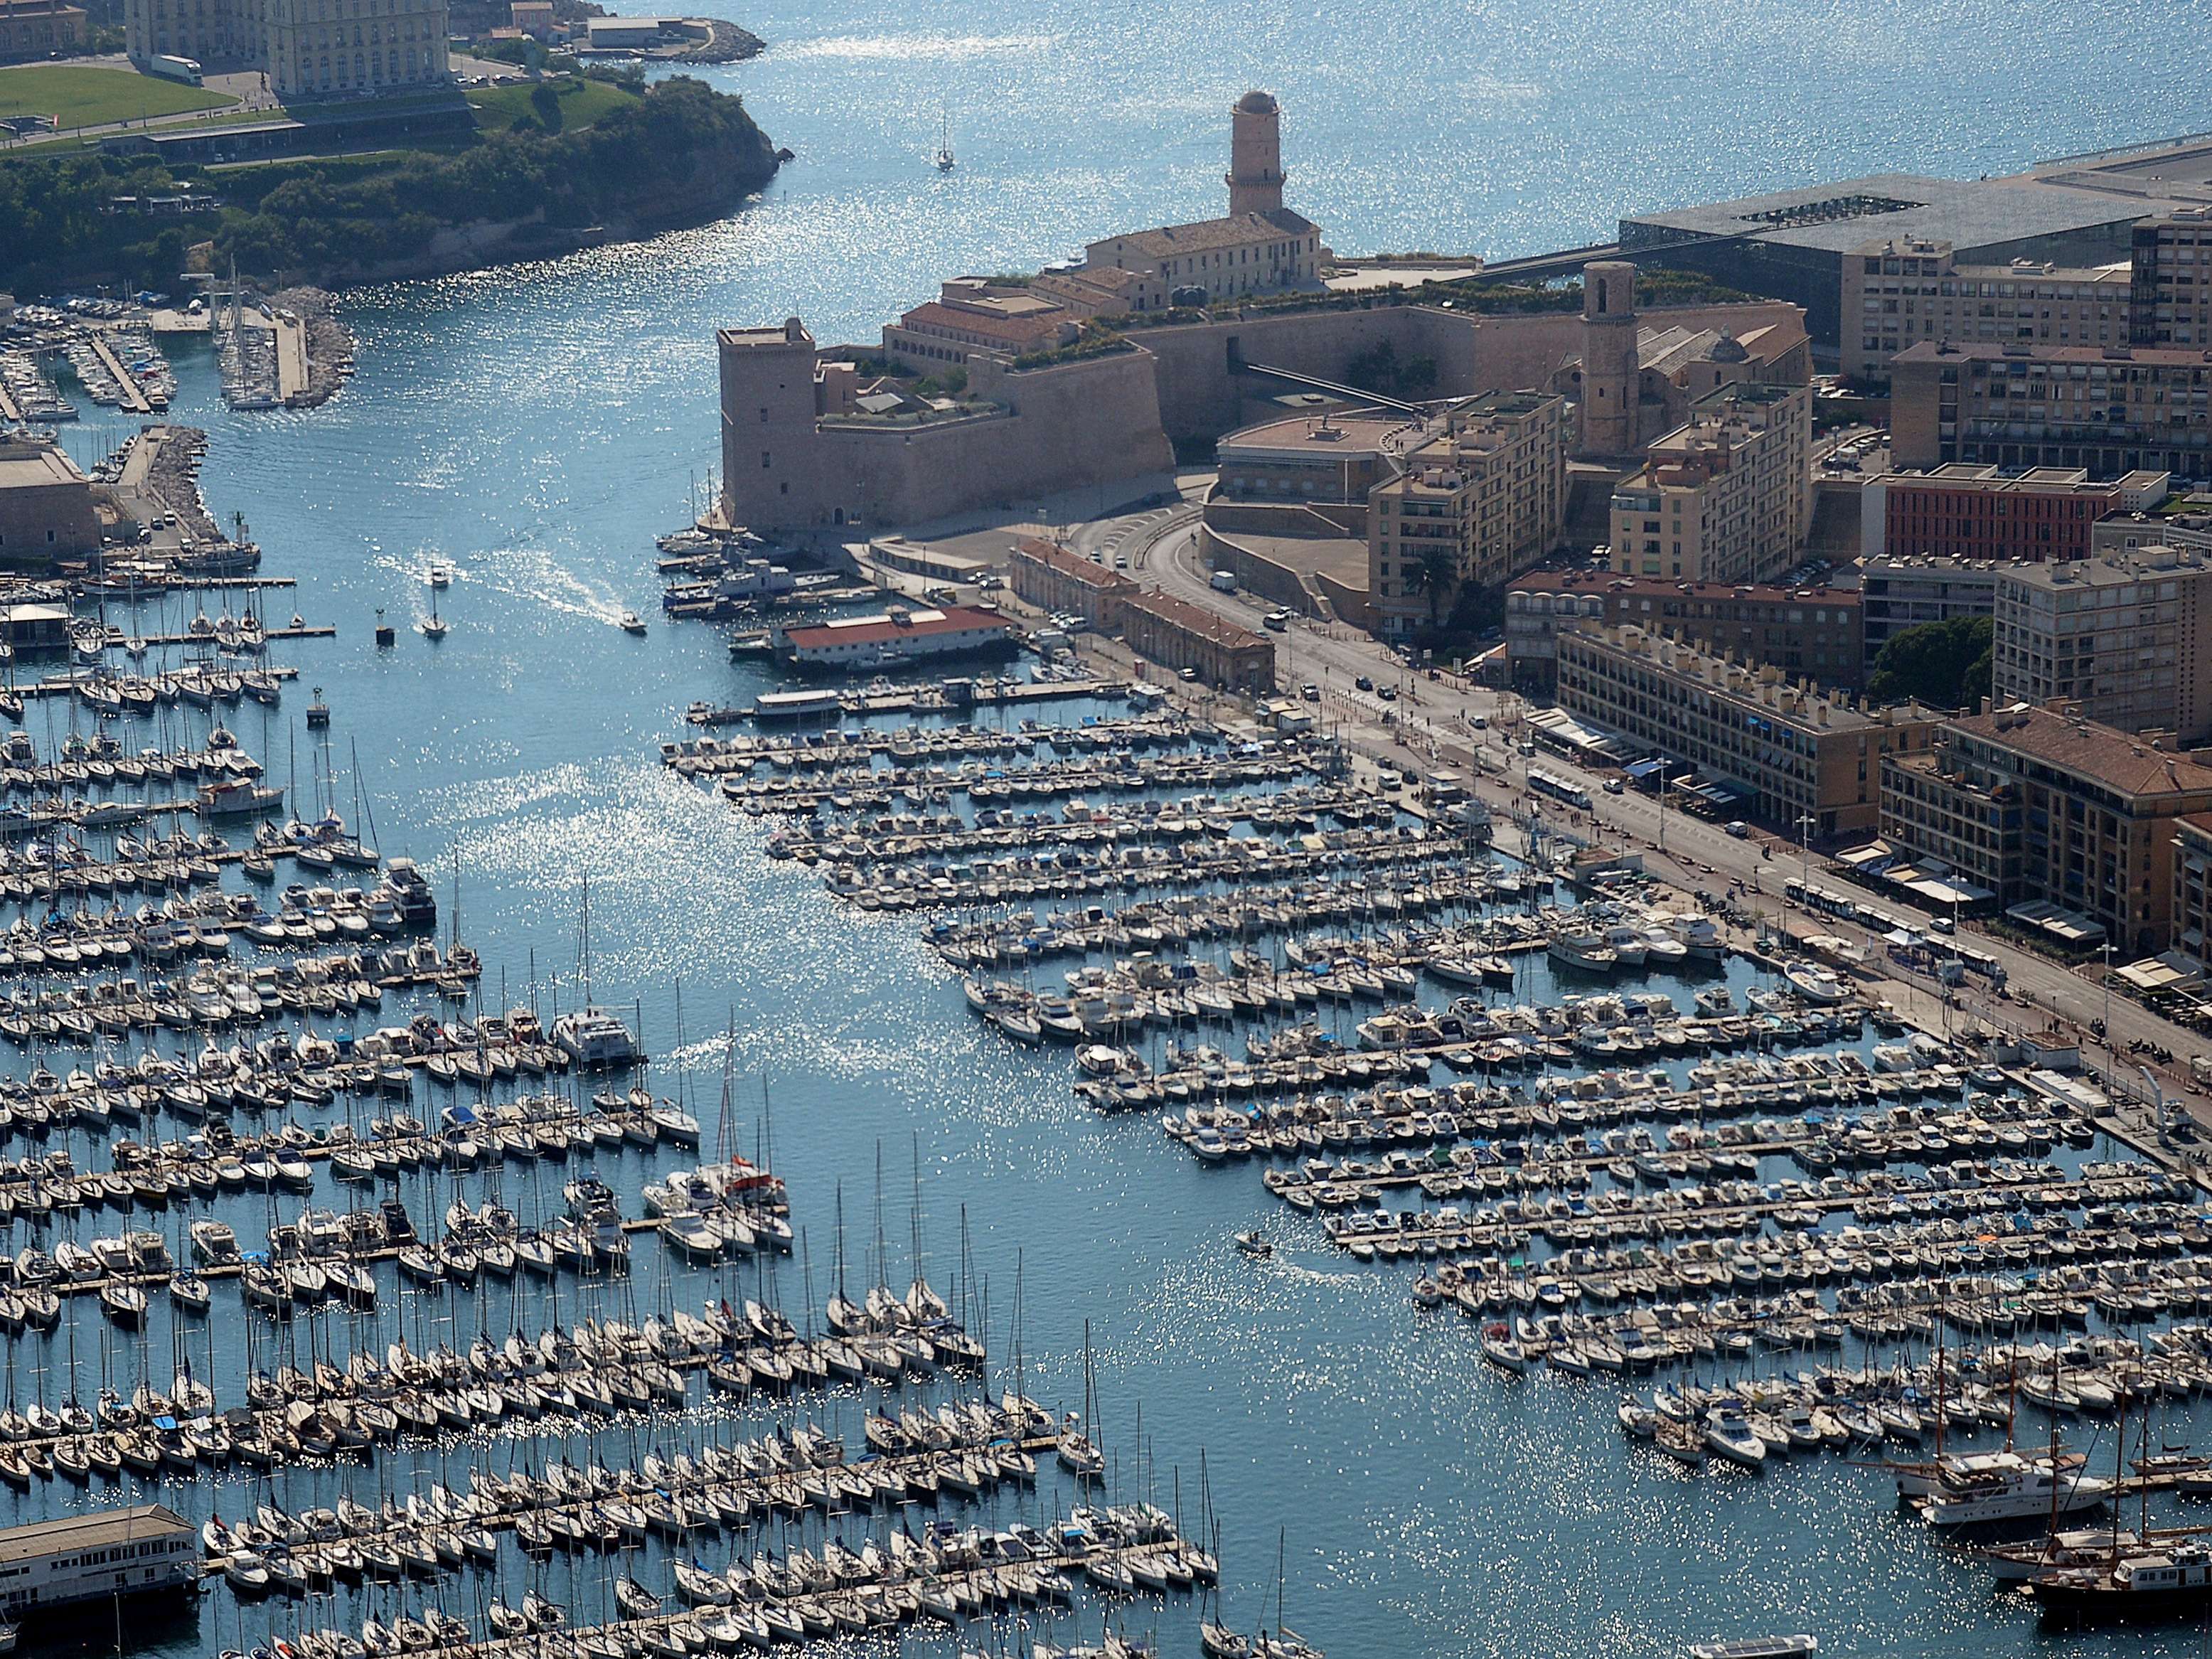 Marseille's sea ports have played a significant role in the city's